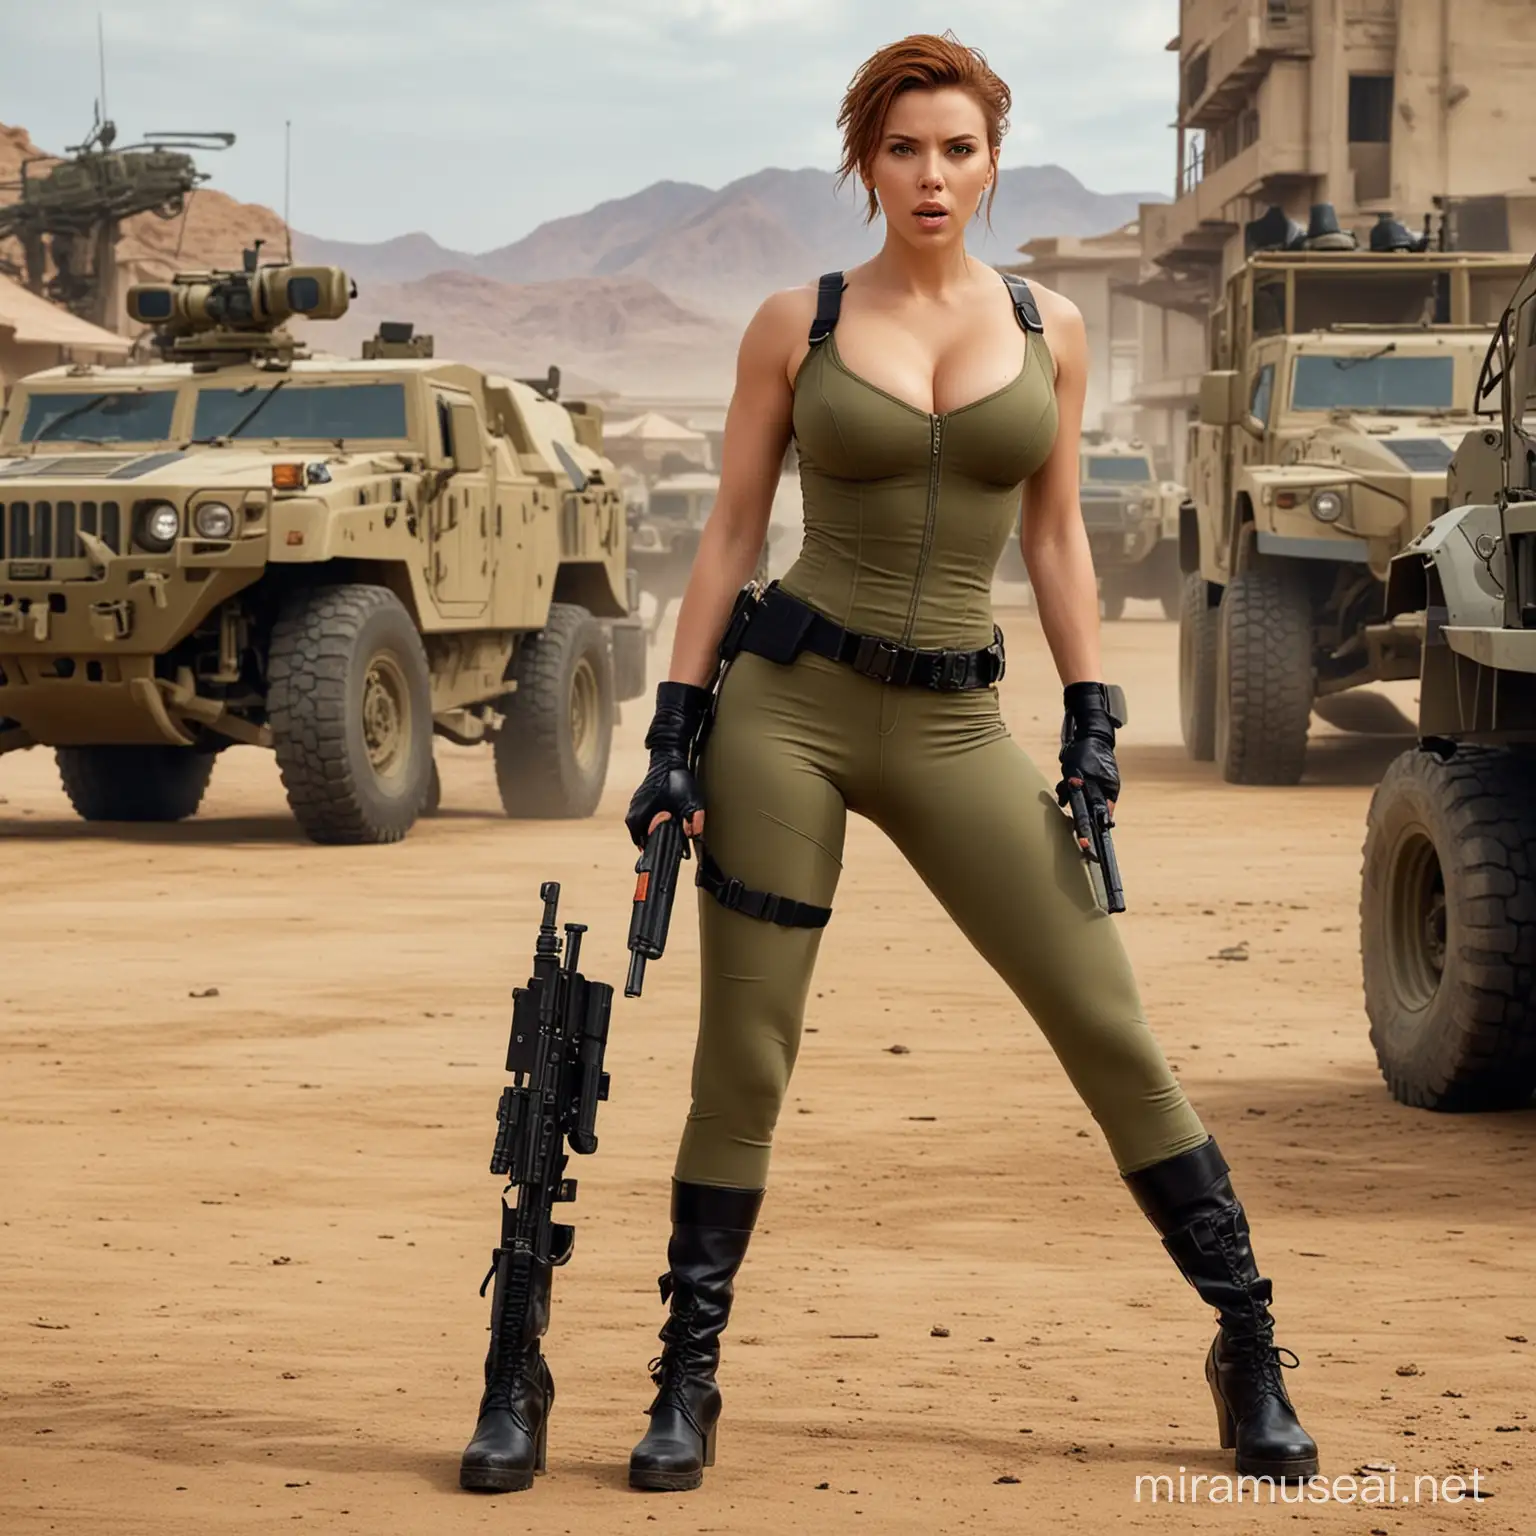 Scarlett Johansson as Lady Jaye in Action with Military Equipment